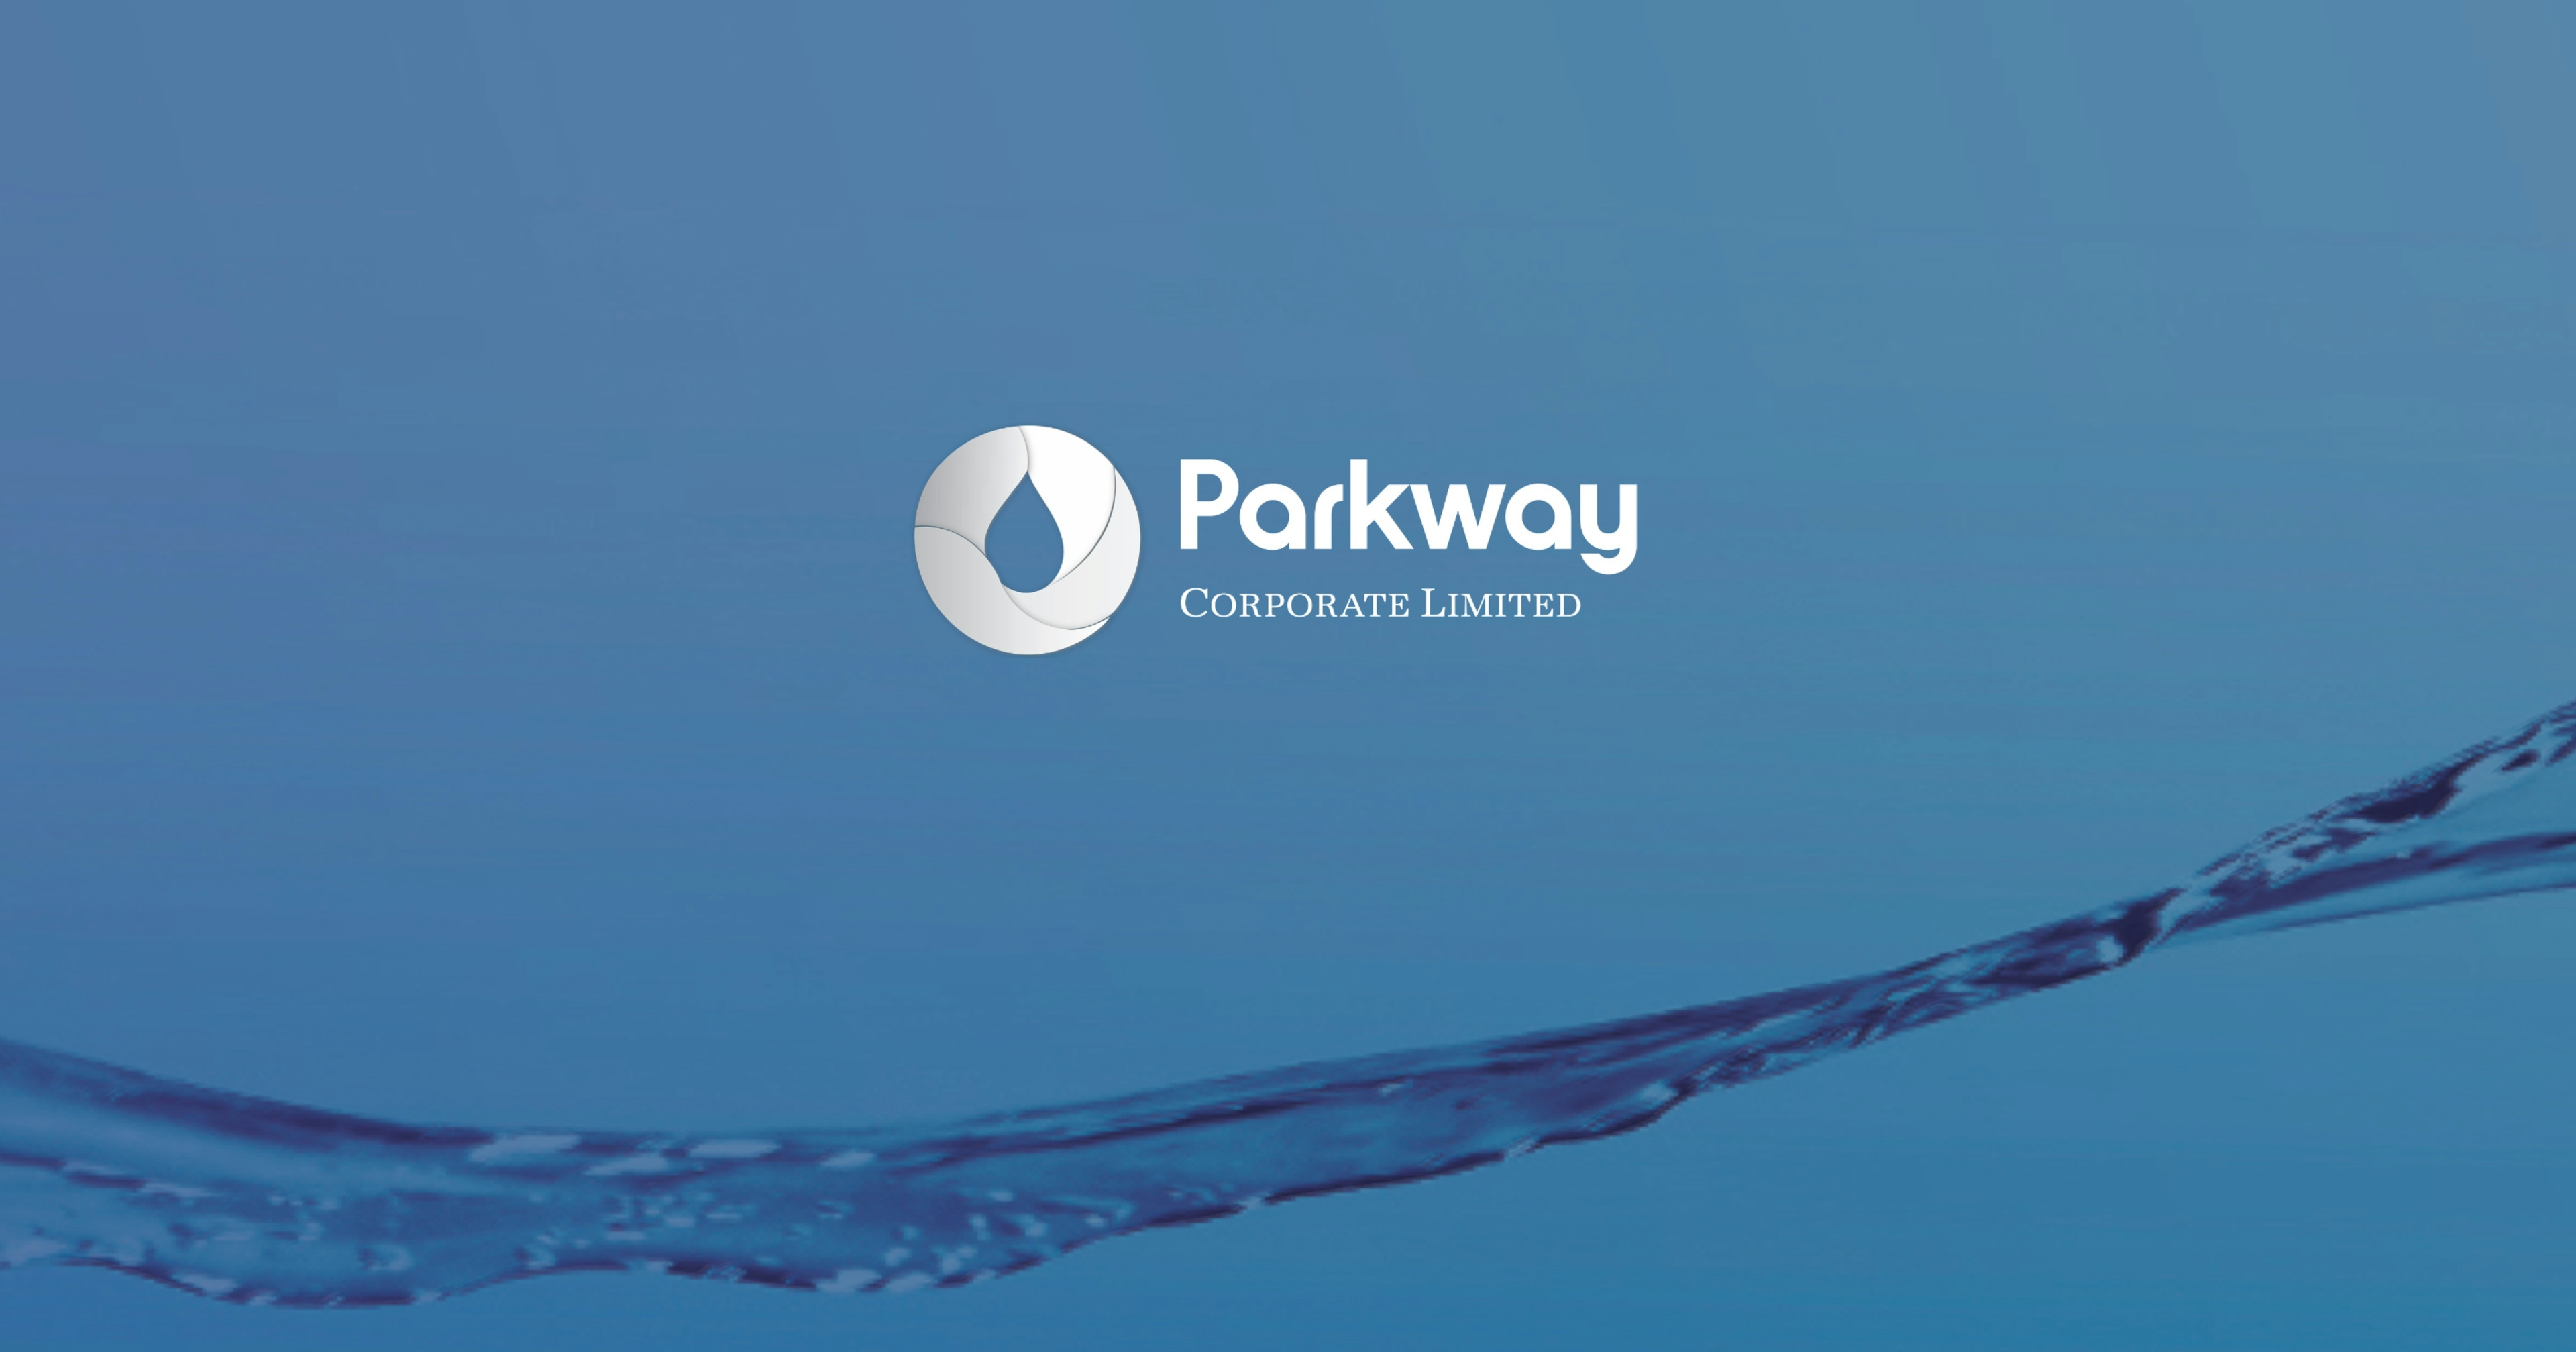 Parkway Corporate Limited investor hub background image